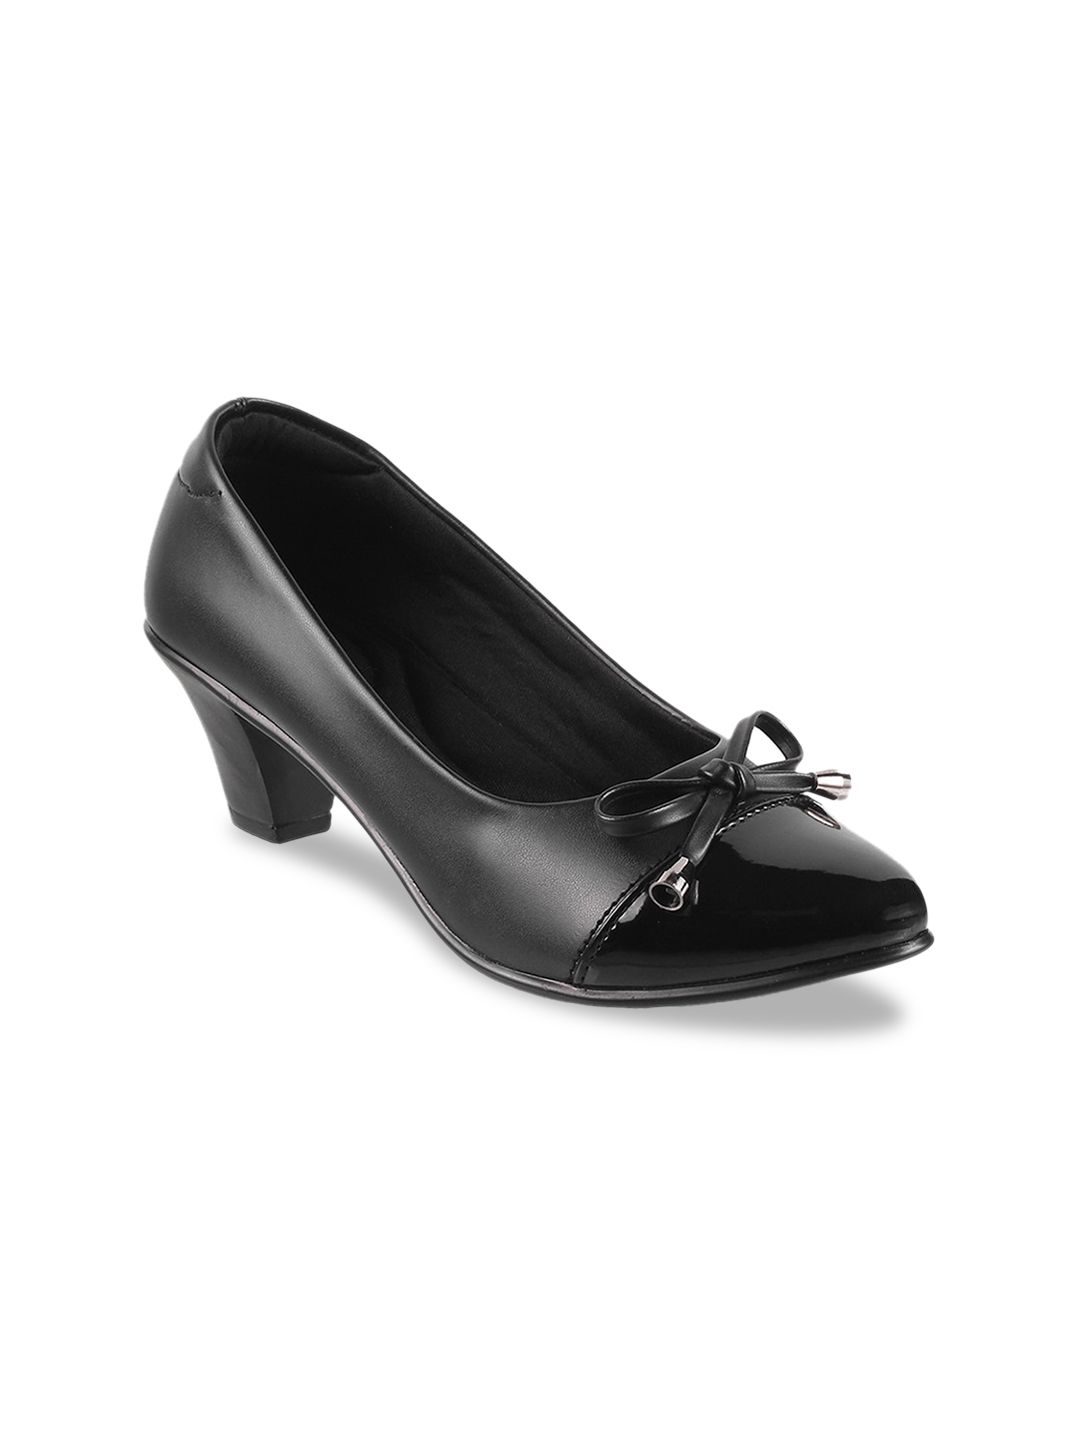 Mochi Black Block Pumps with Bows Price in India